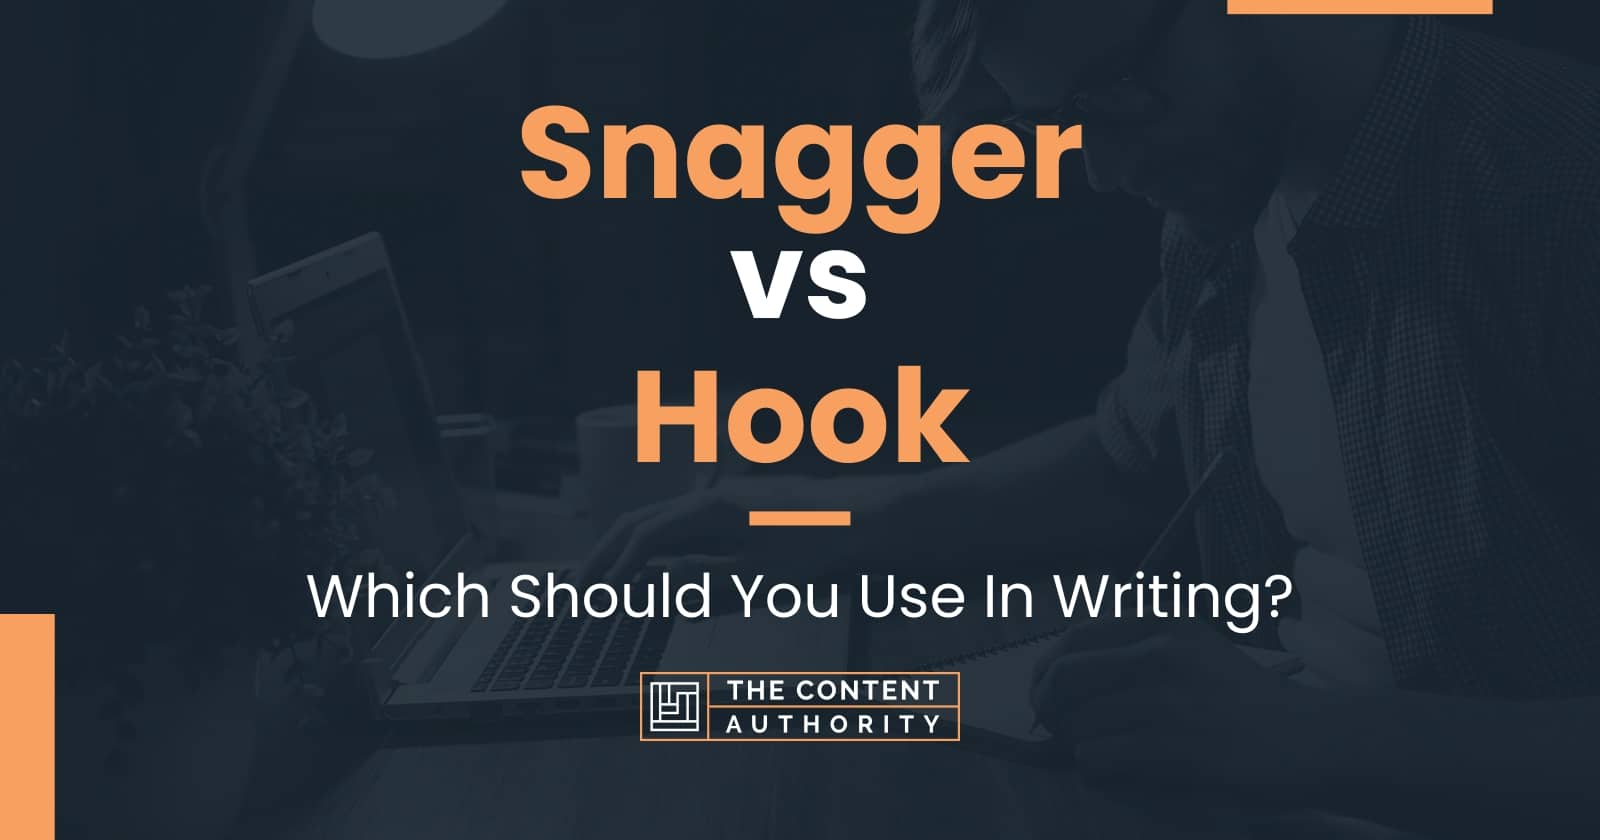 Snagger vs Hook: Which Should You Use In Writing?